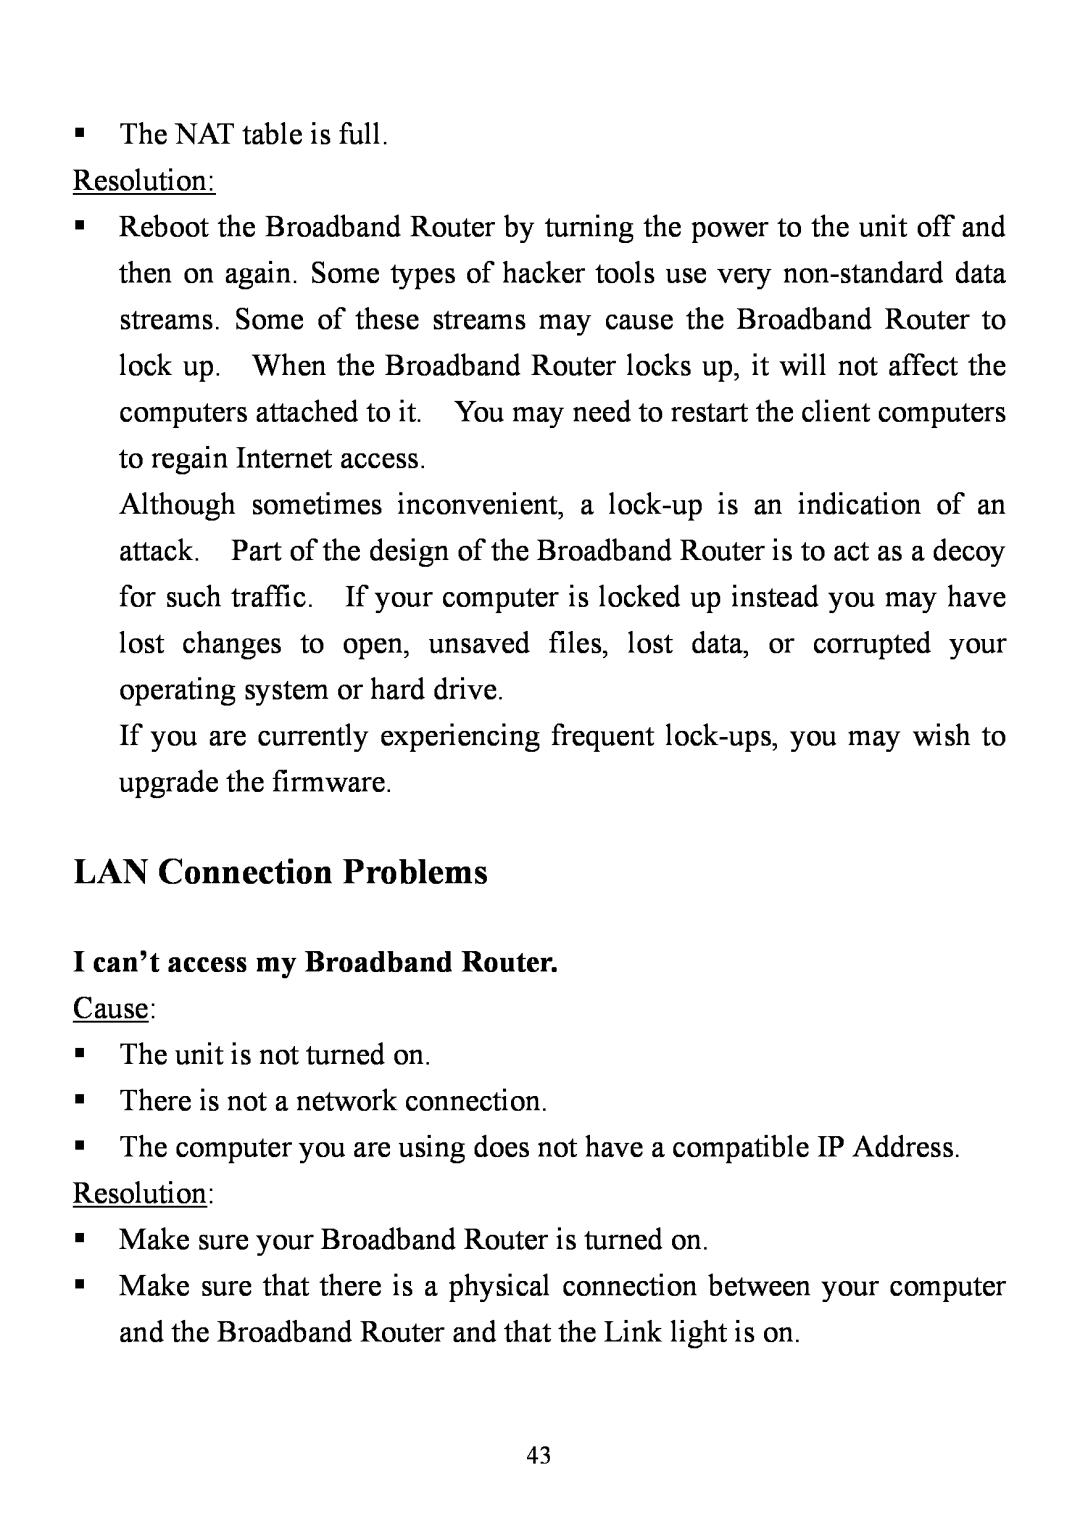 D-Link DI-714 user manual LAN Connection Problems, I can’t access my Broadband Router 